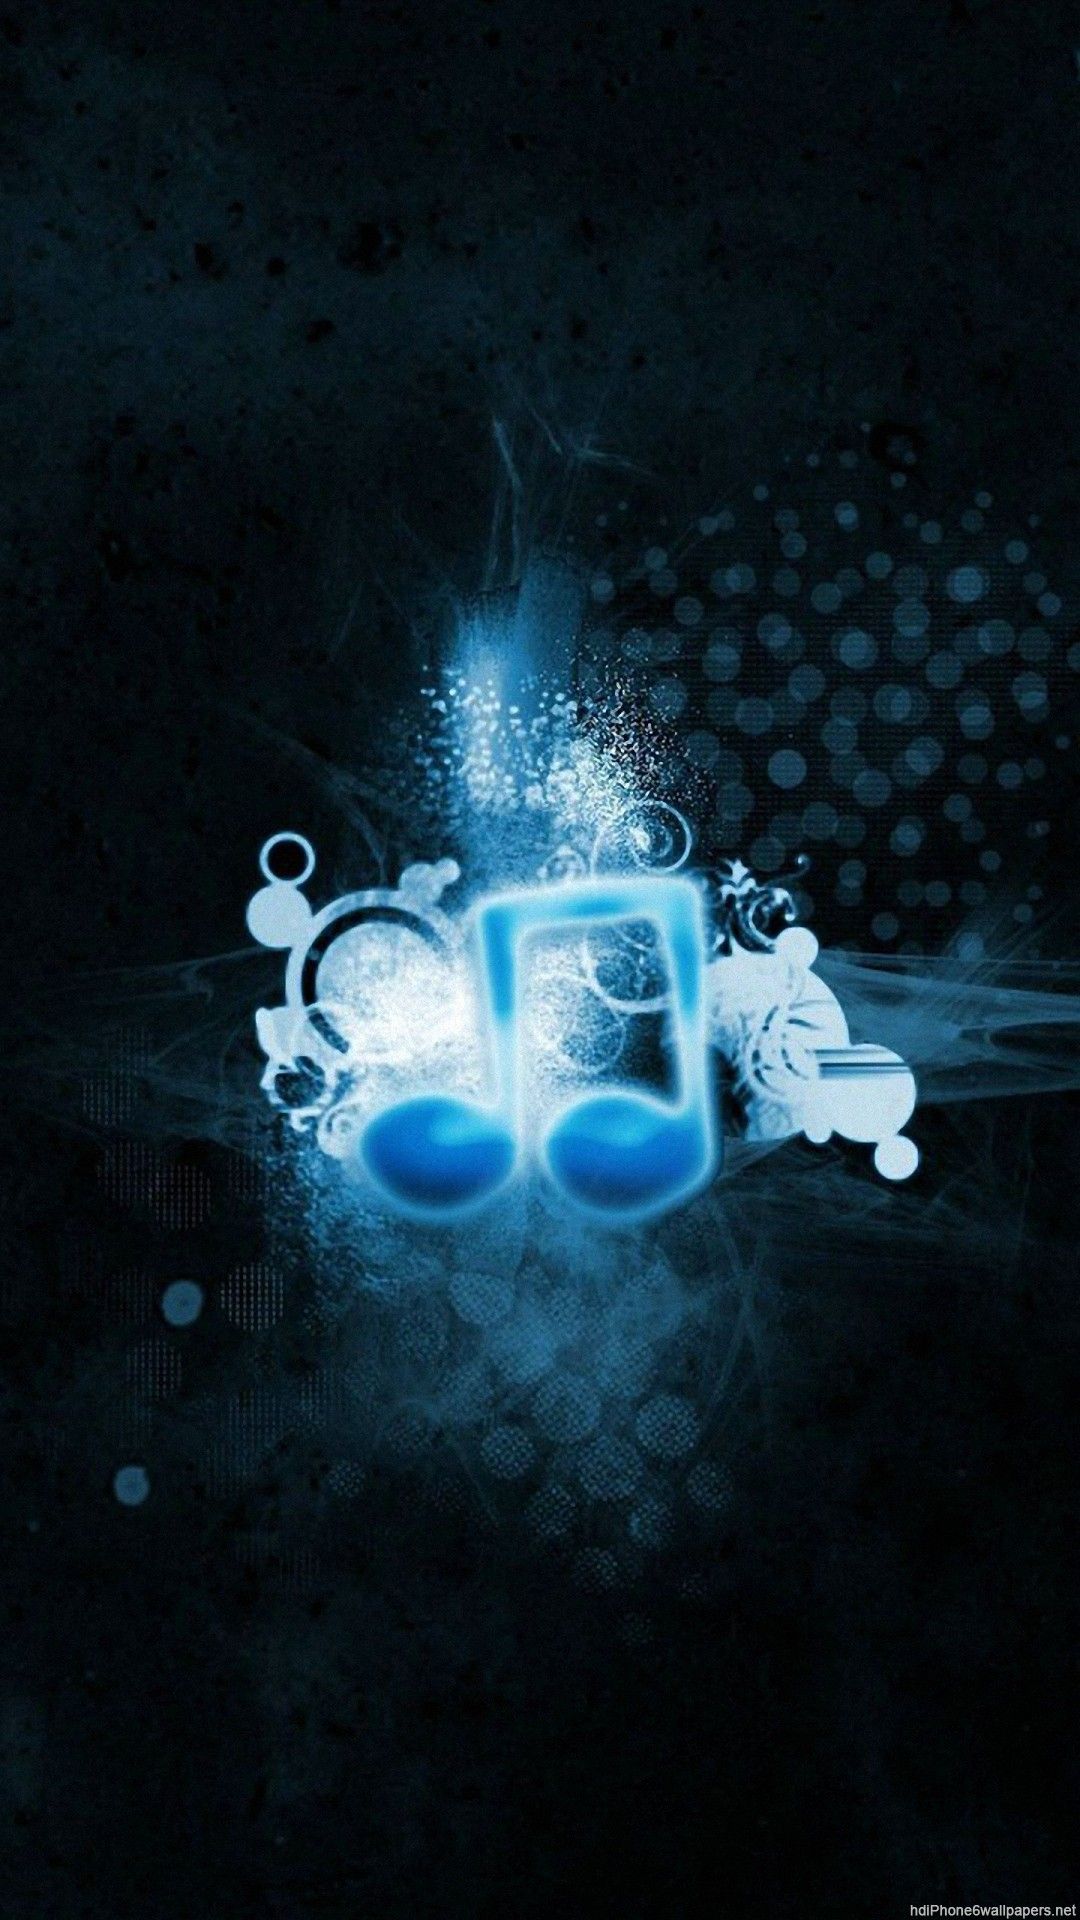 Music Wallpaper for iPhone